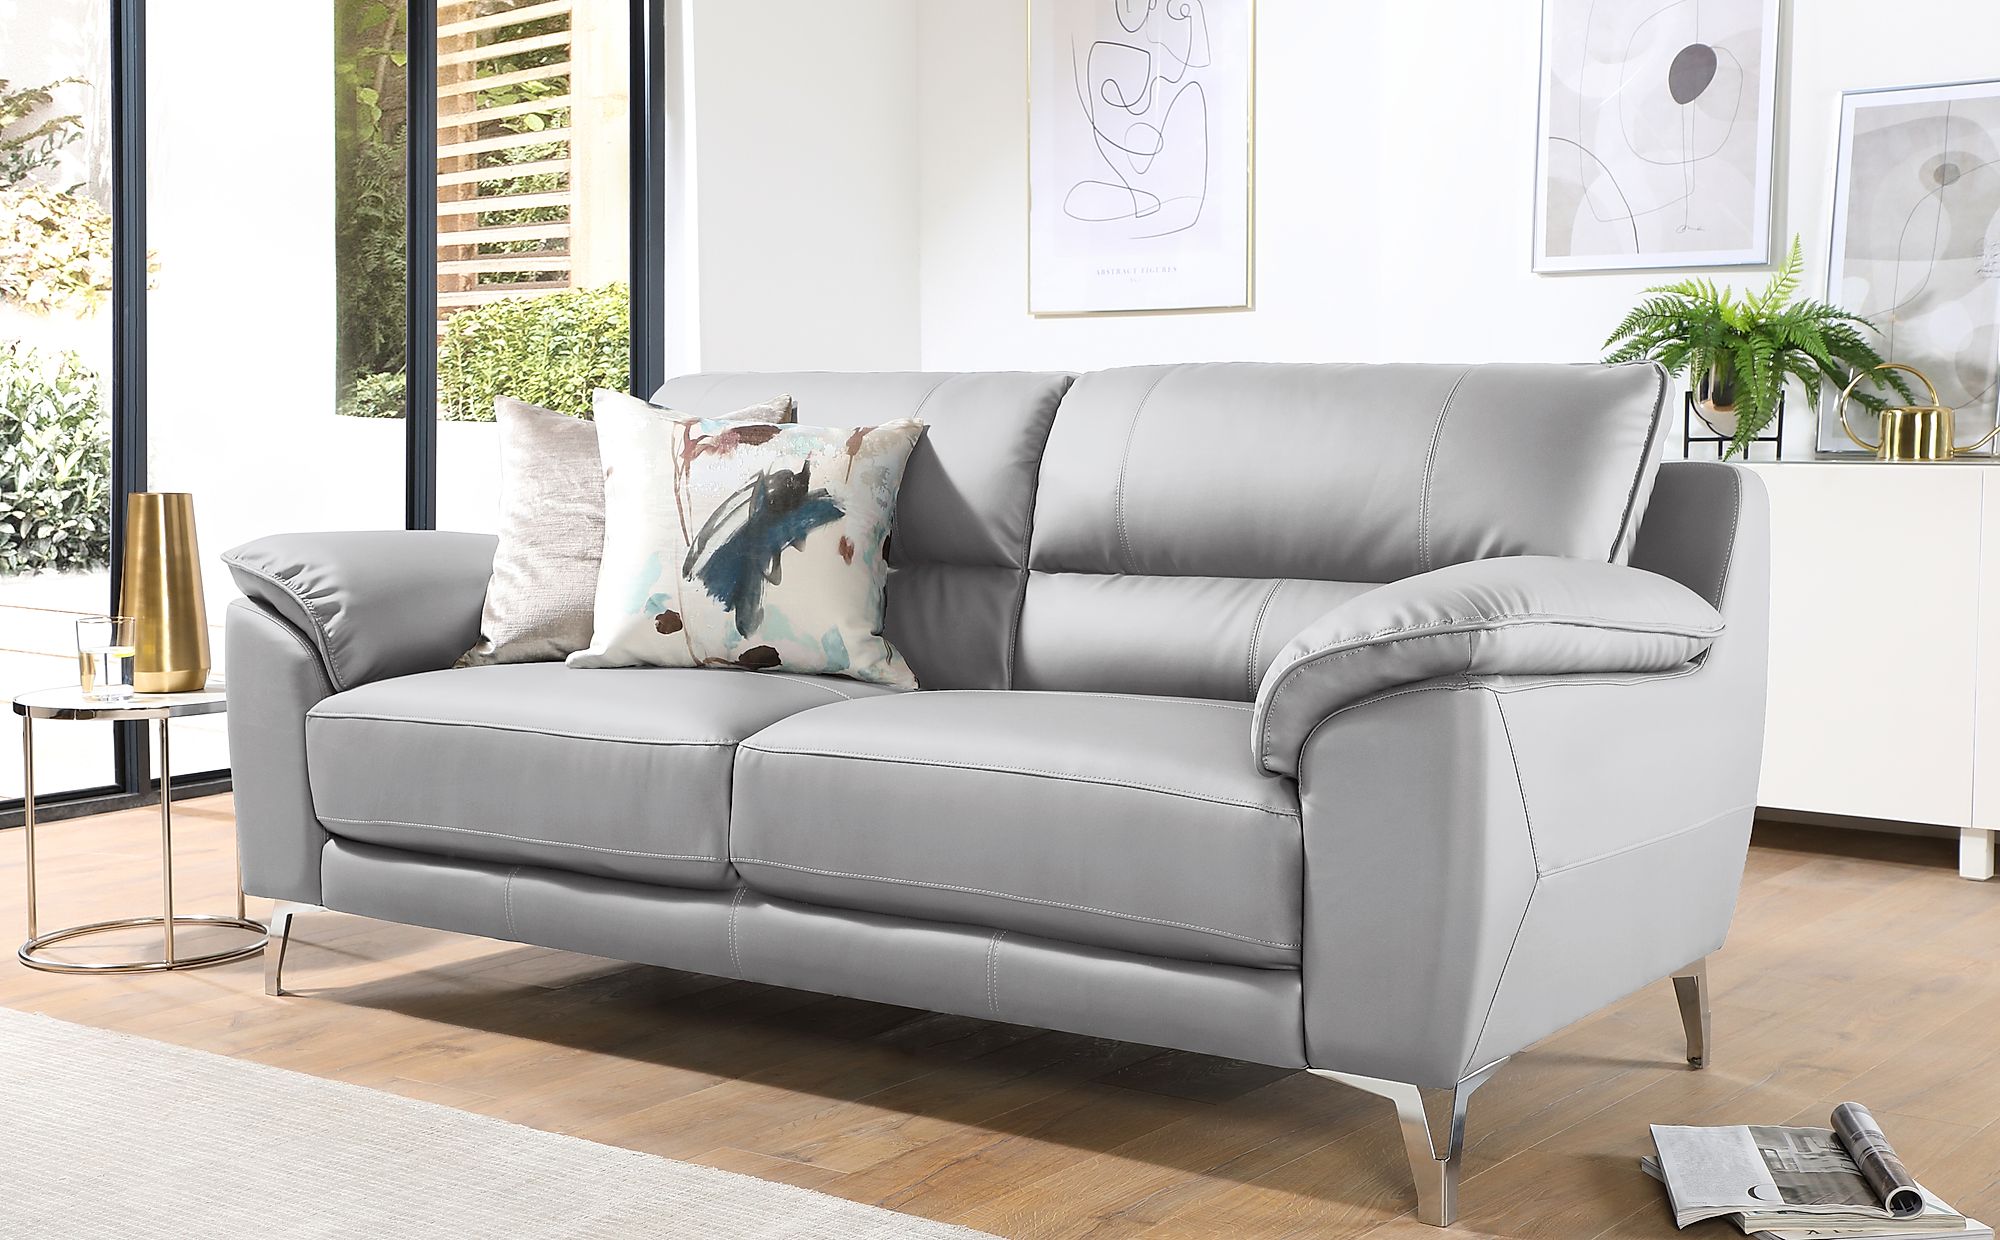 pale gray leather sofa